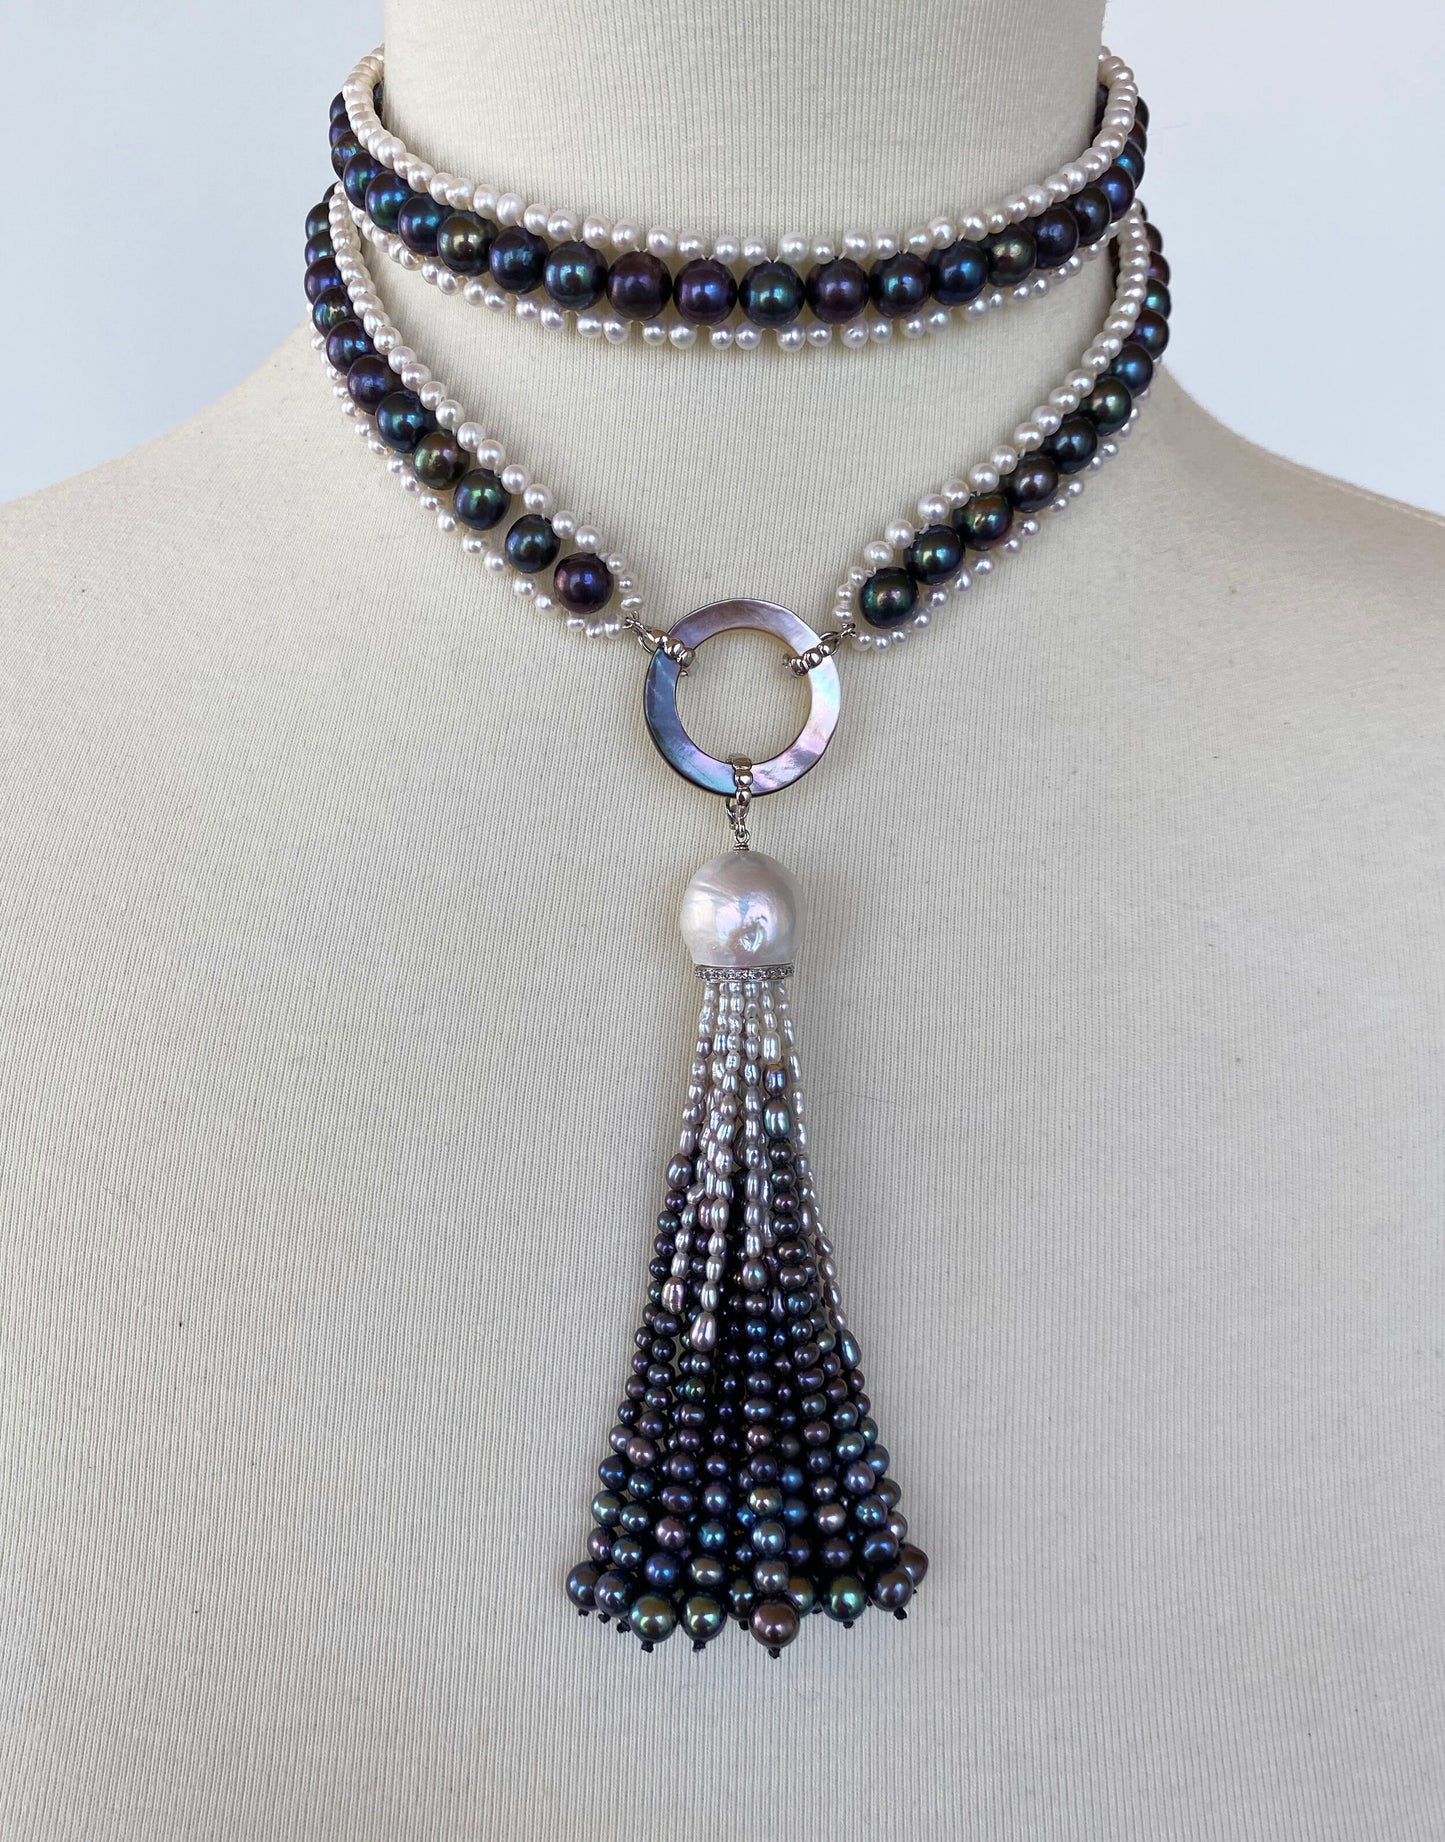 Marina J. Black and White Woven Pearl Sautoir with Abalone Shell & Ombre Tassel